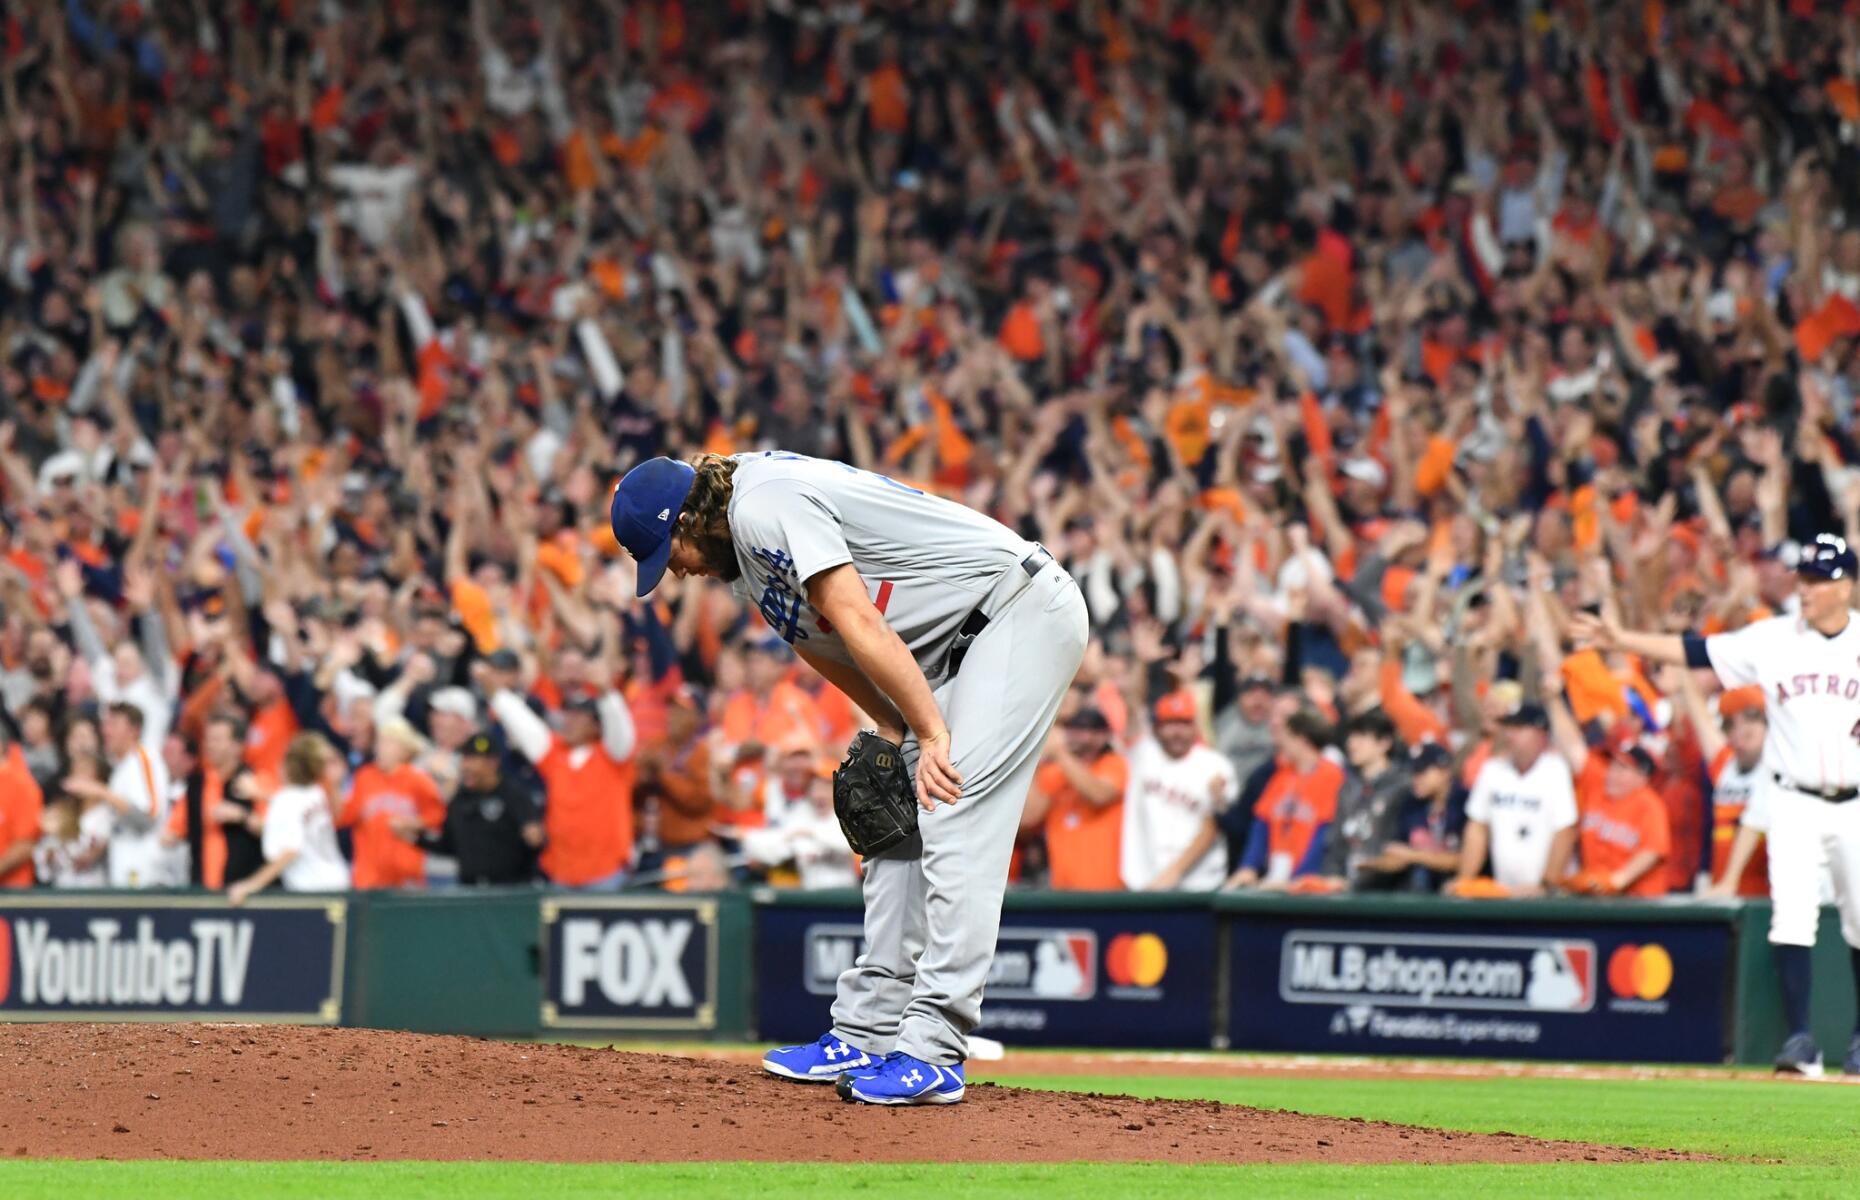 Dodgers pitcher Clayton Kershaw reacts after giving up a three-run home run to the Houston Astros.